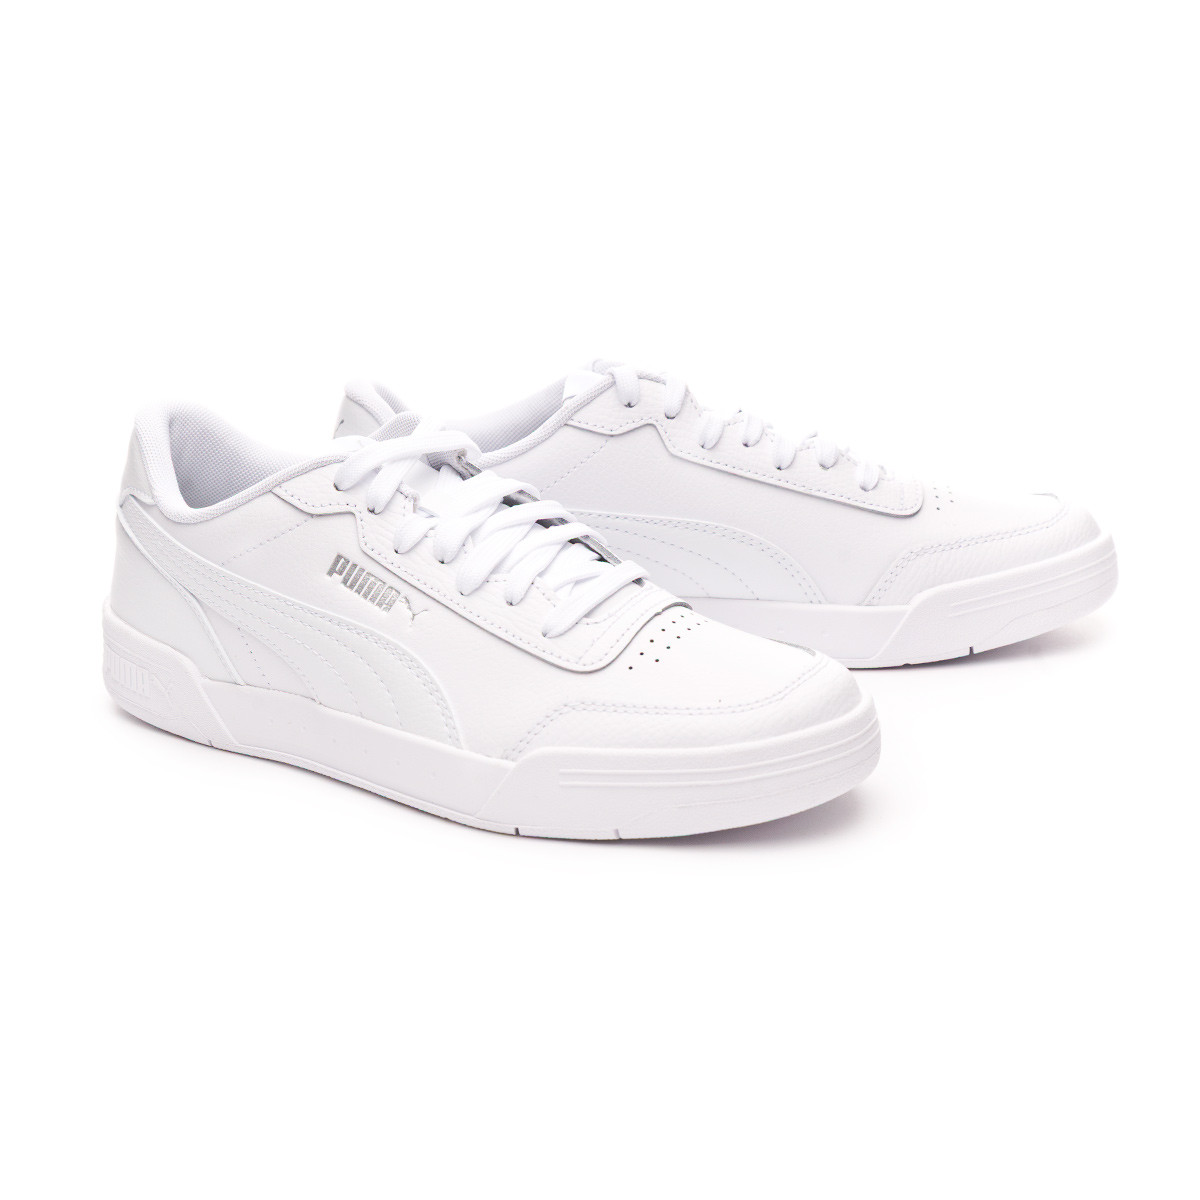 white and silver pumas off 64% - www 